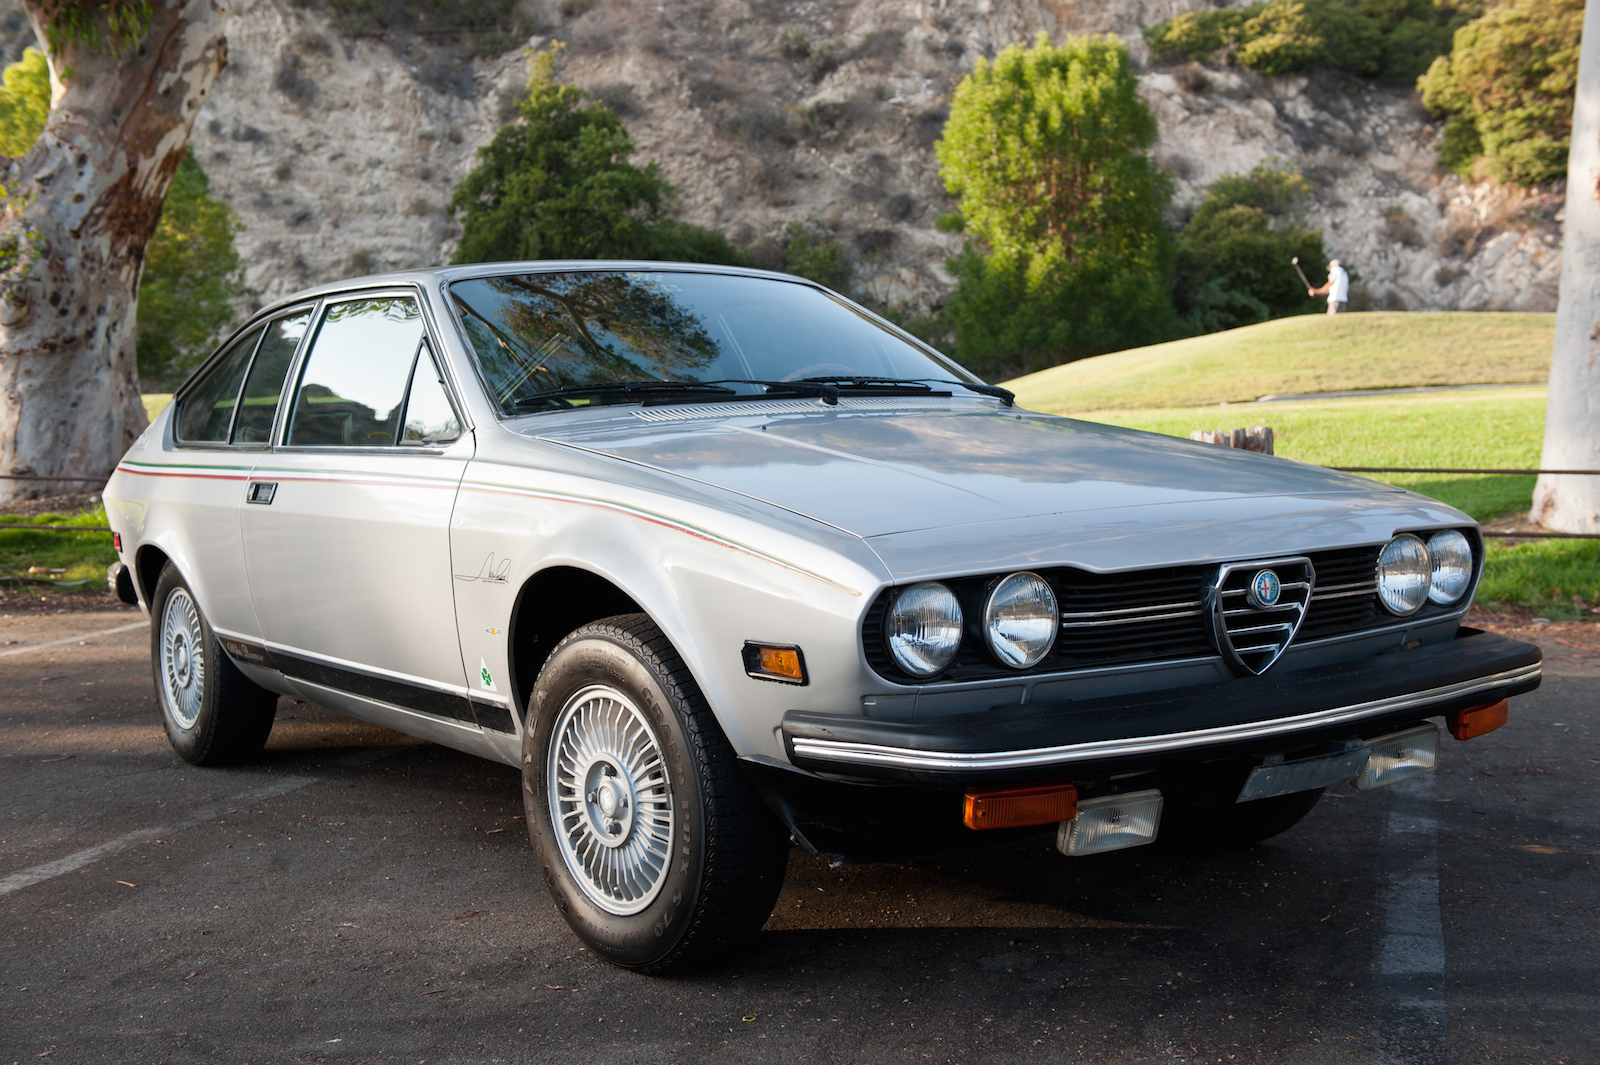 See The New Price On This 1976 Alfa Romeo GTV Mario Andretti Limited Edition